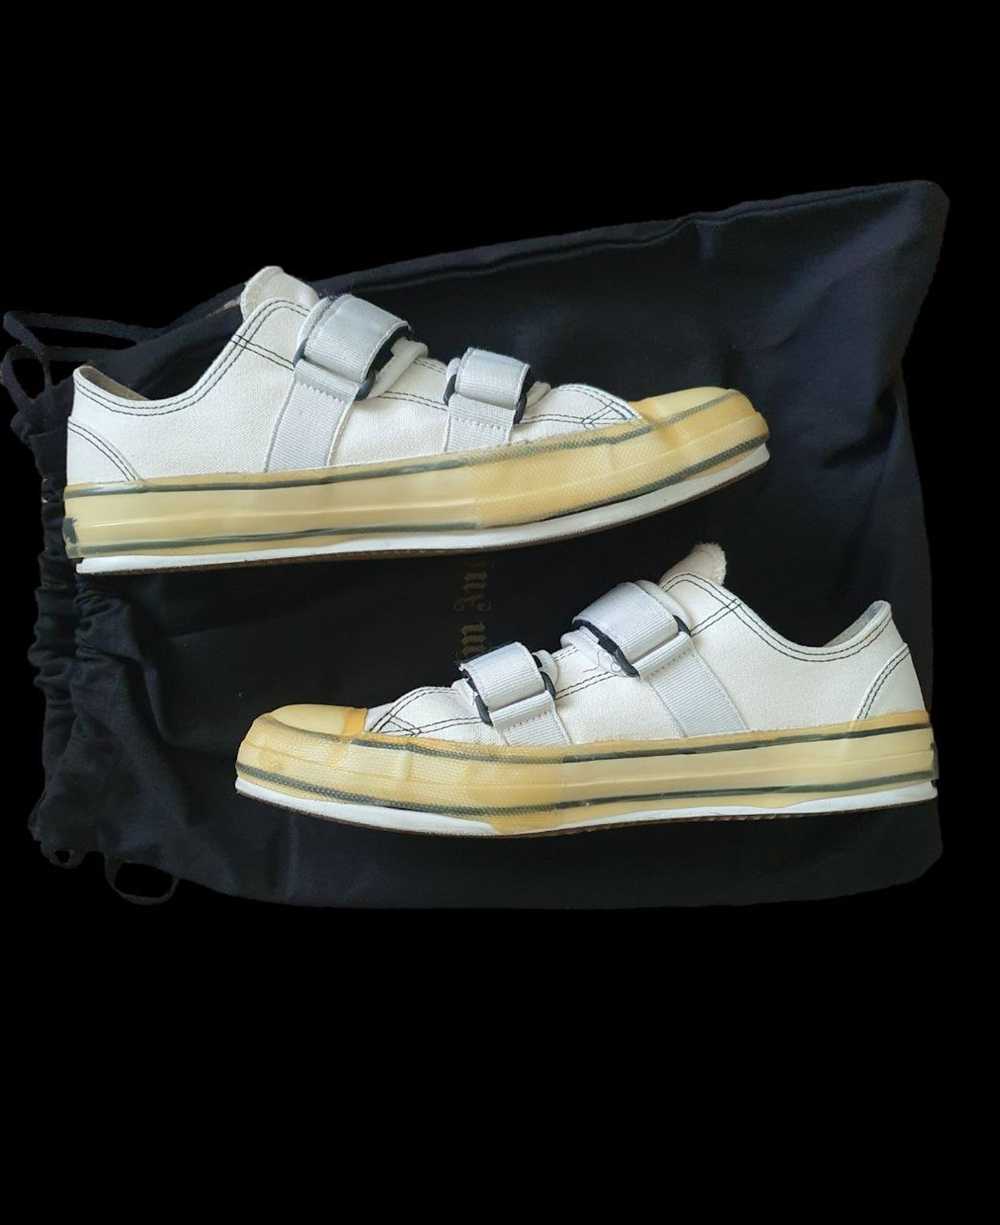 Palm Angels Velcro sneakers - image 3